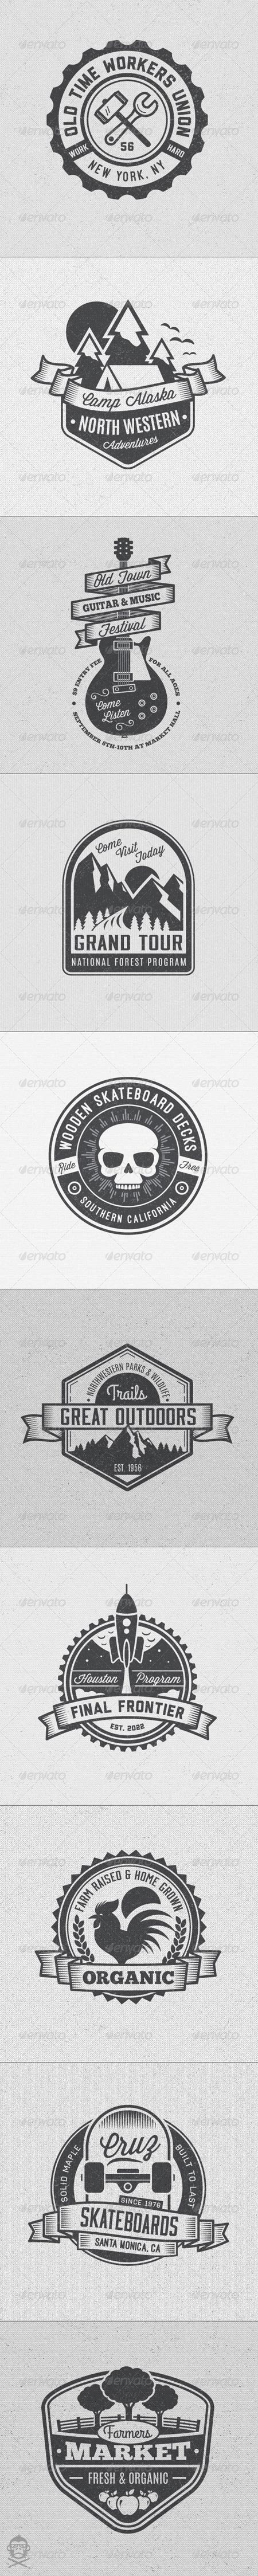 Vintage Style Badges and Logos Vol 4 8594929